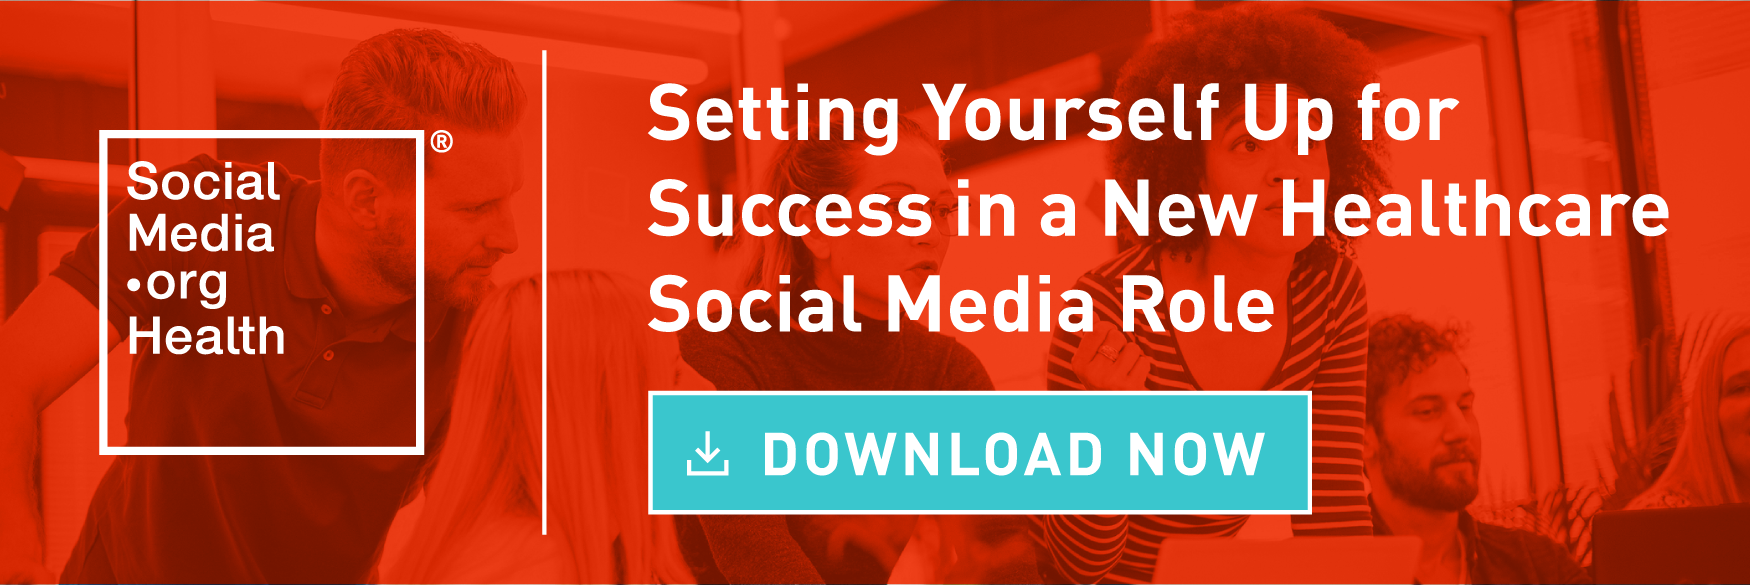 Leading Social Media in a Large Hospital: Setting Yourself Up for Success in a New Role